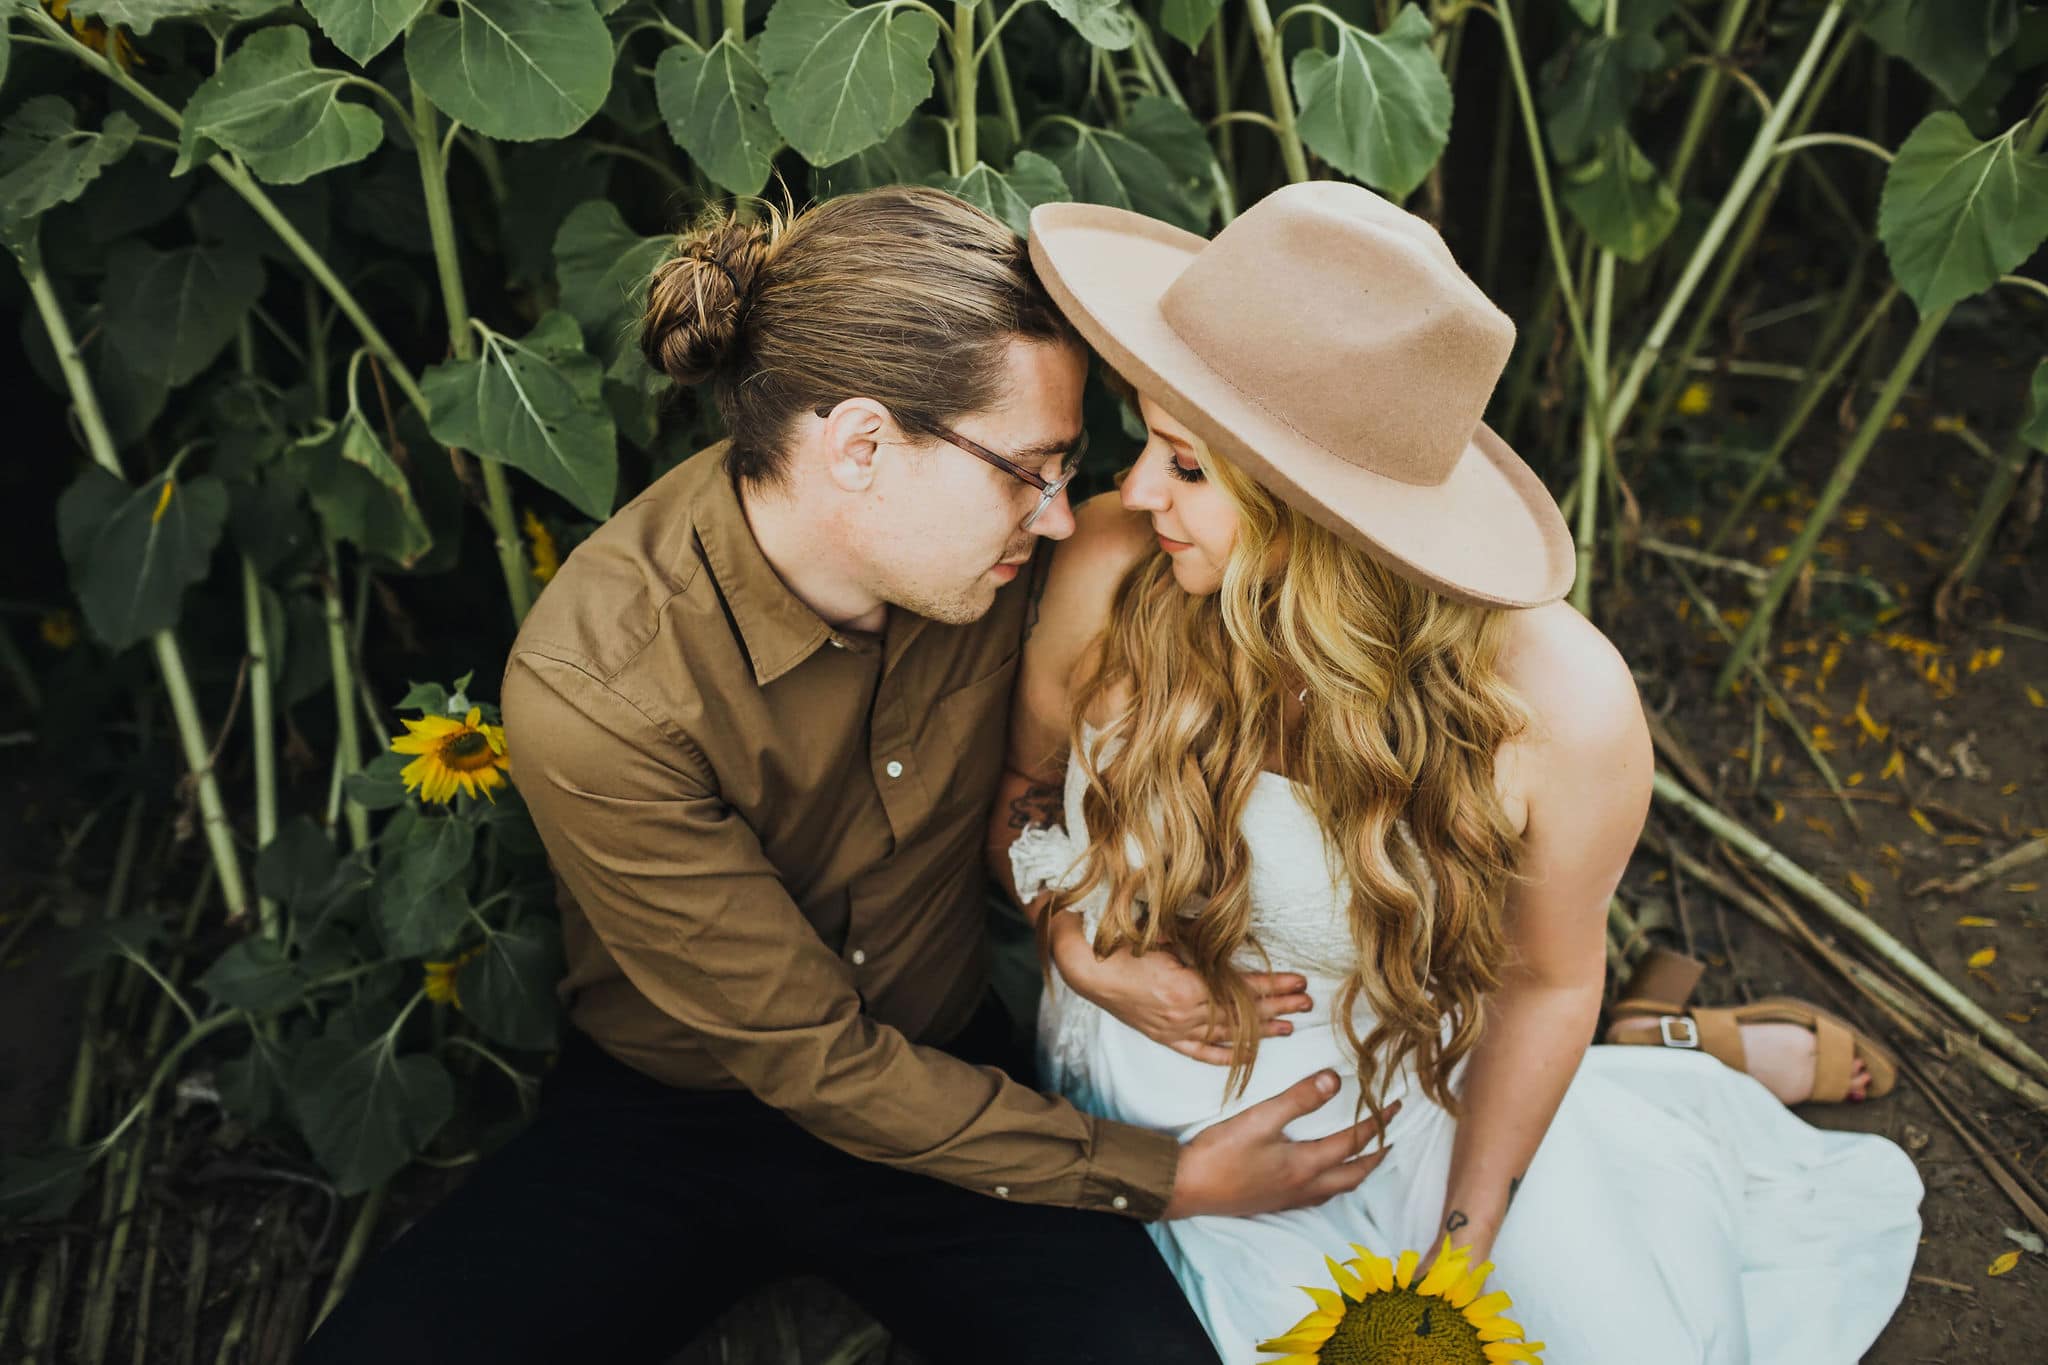 Pregnant mom wearing white dress and straw hat while husband hugs her